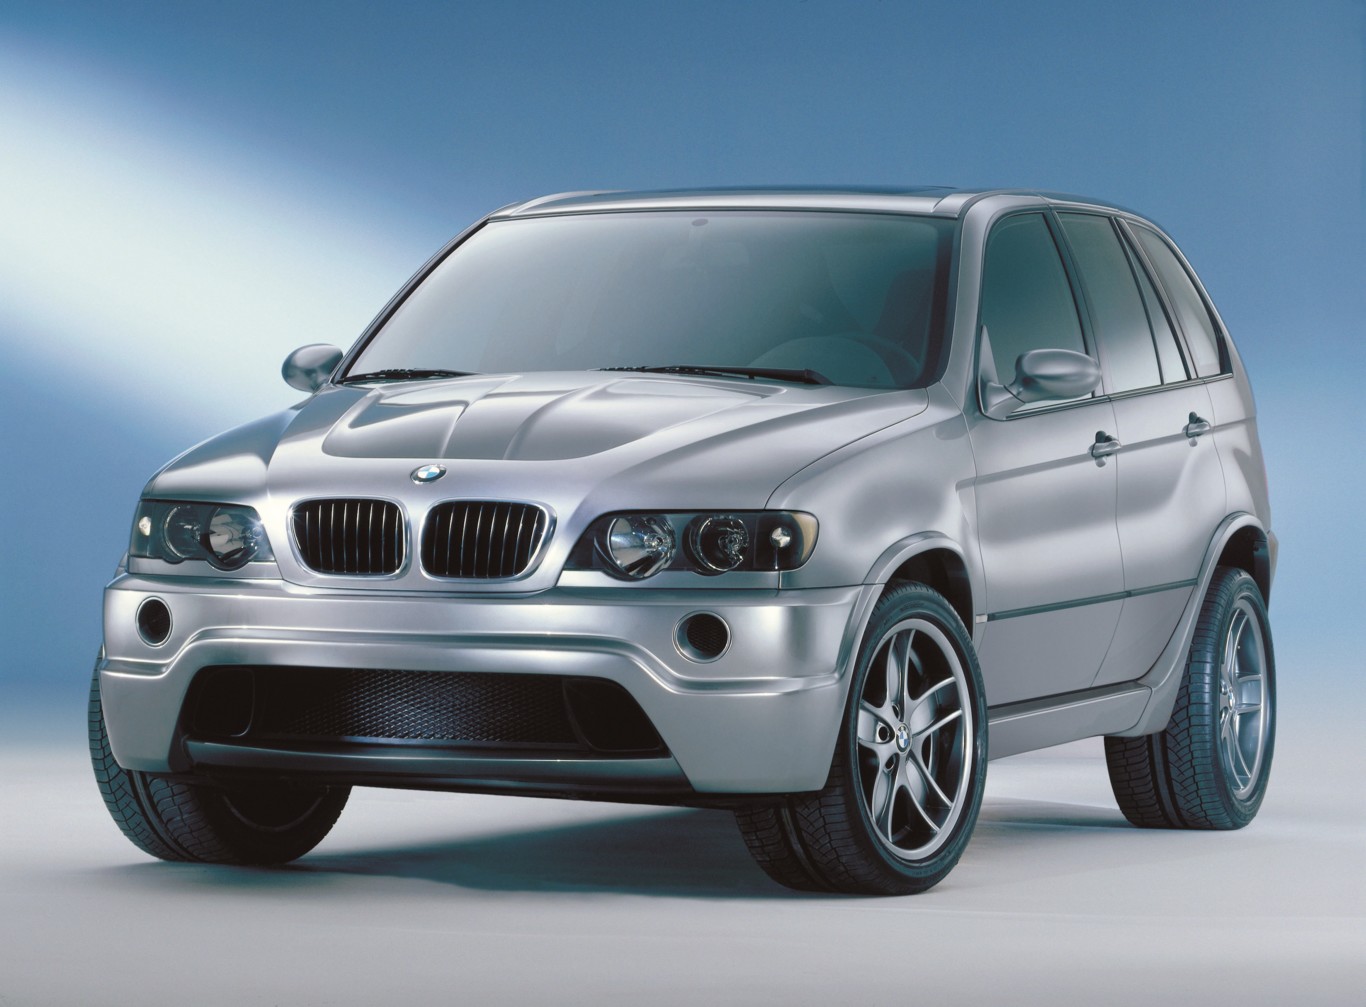 BMW X5 Le Mans, recalling the first performance SUV